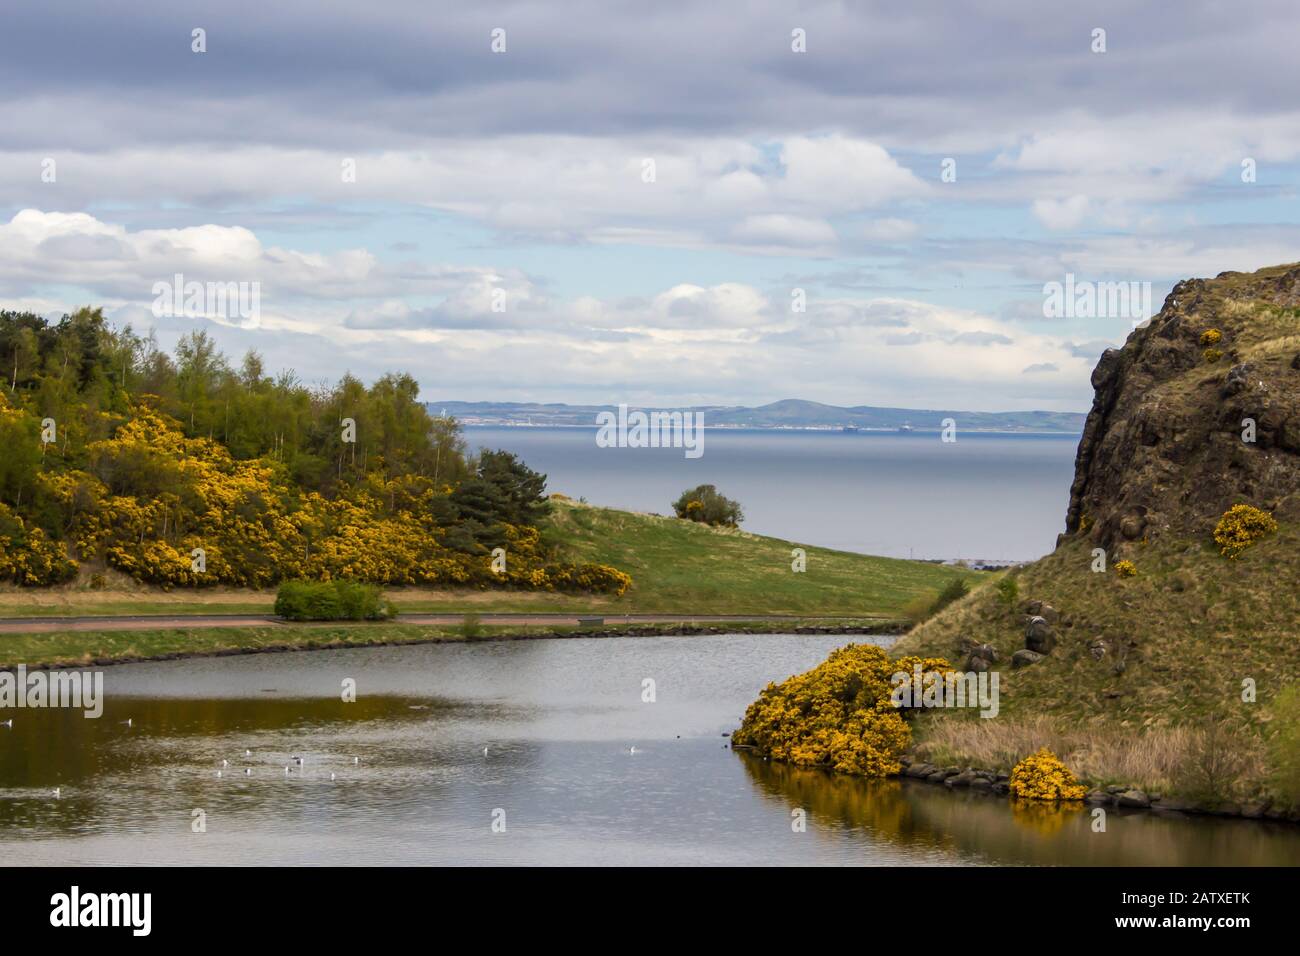 A view over the artificial Loch of Dunsappie in Hollyrood Park, Edinburgh, with the Firth of Forth in the Background and Gorse bushes Stock Photo